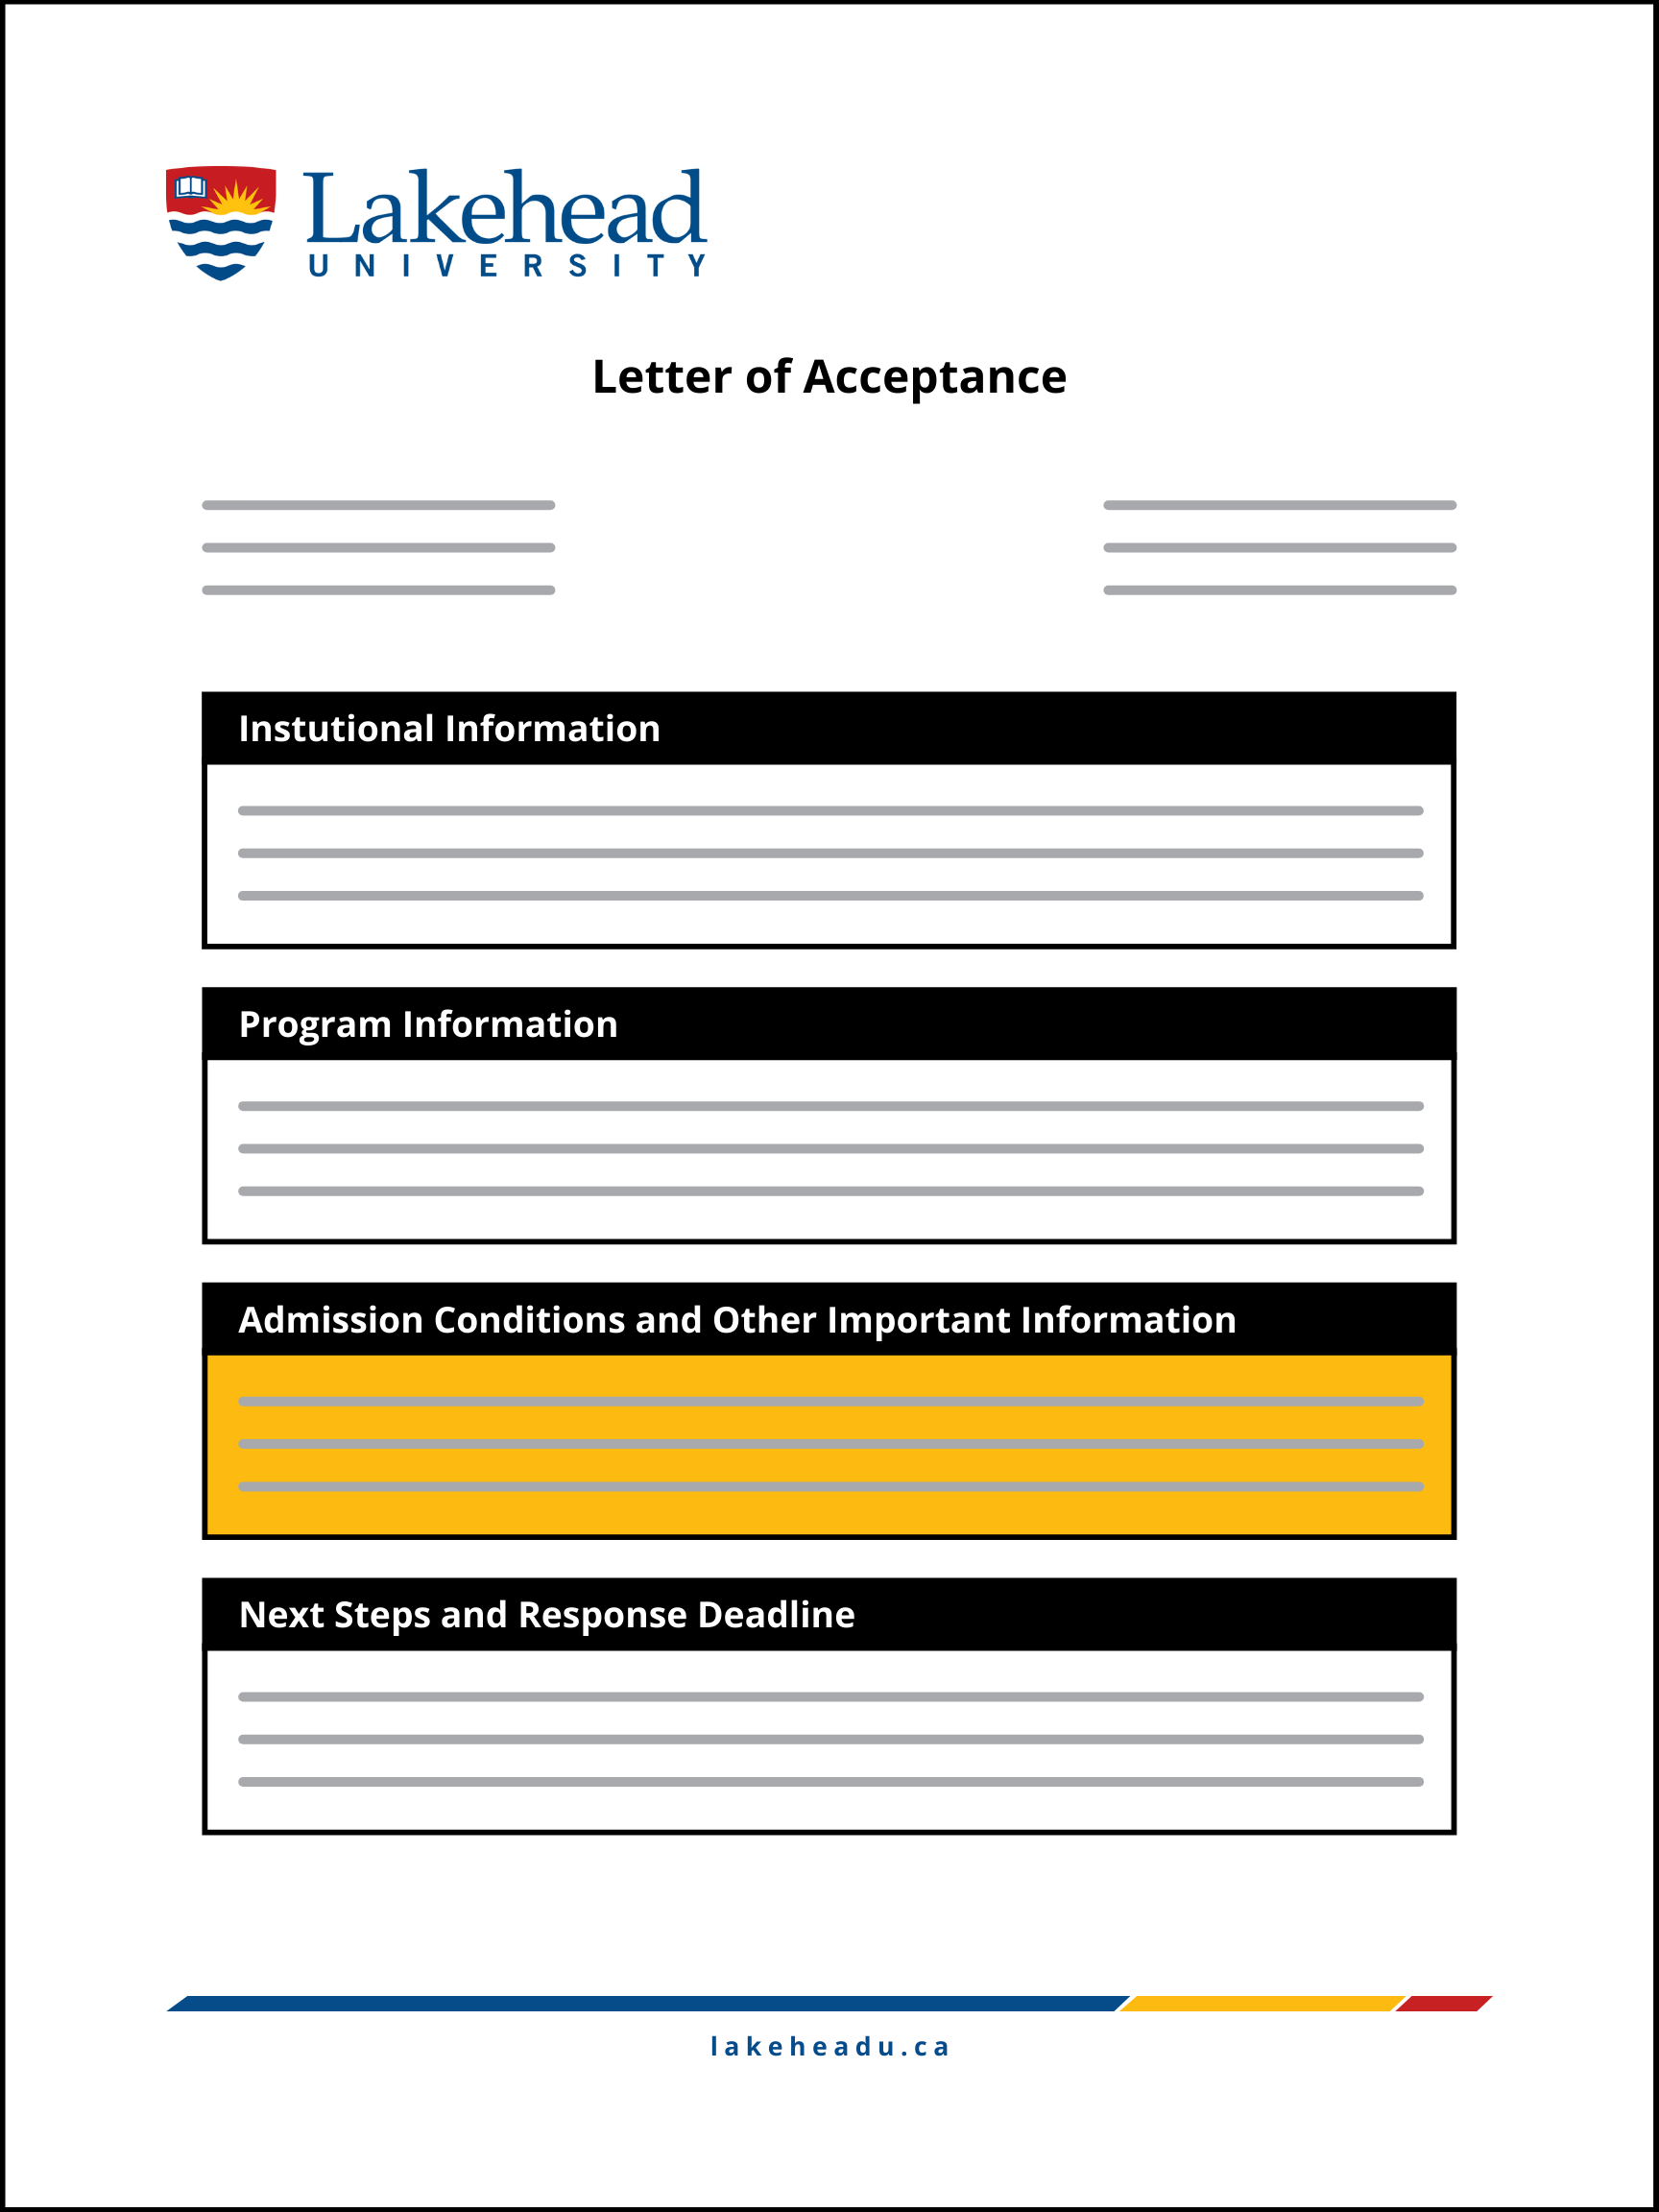 Letter of Acceptance - conditions